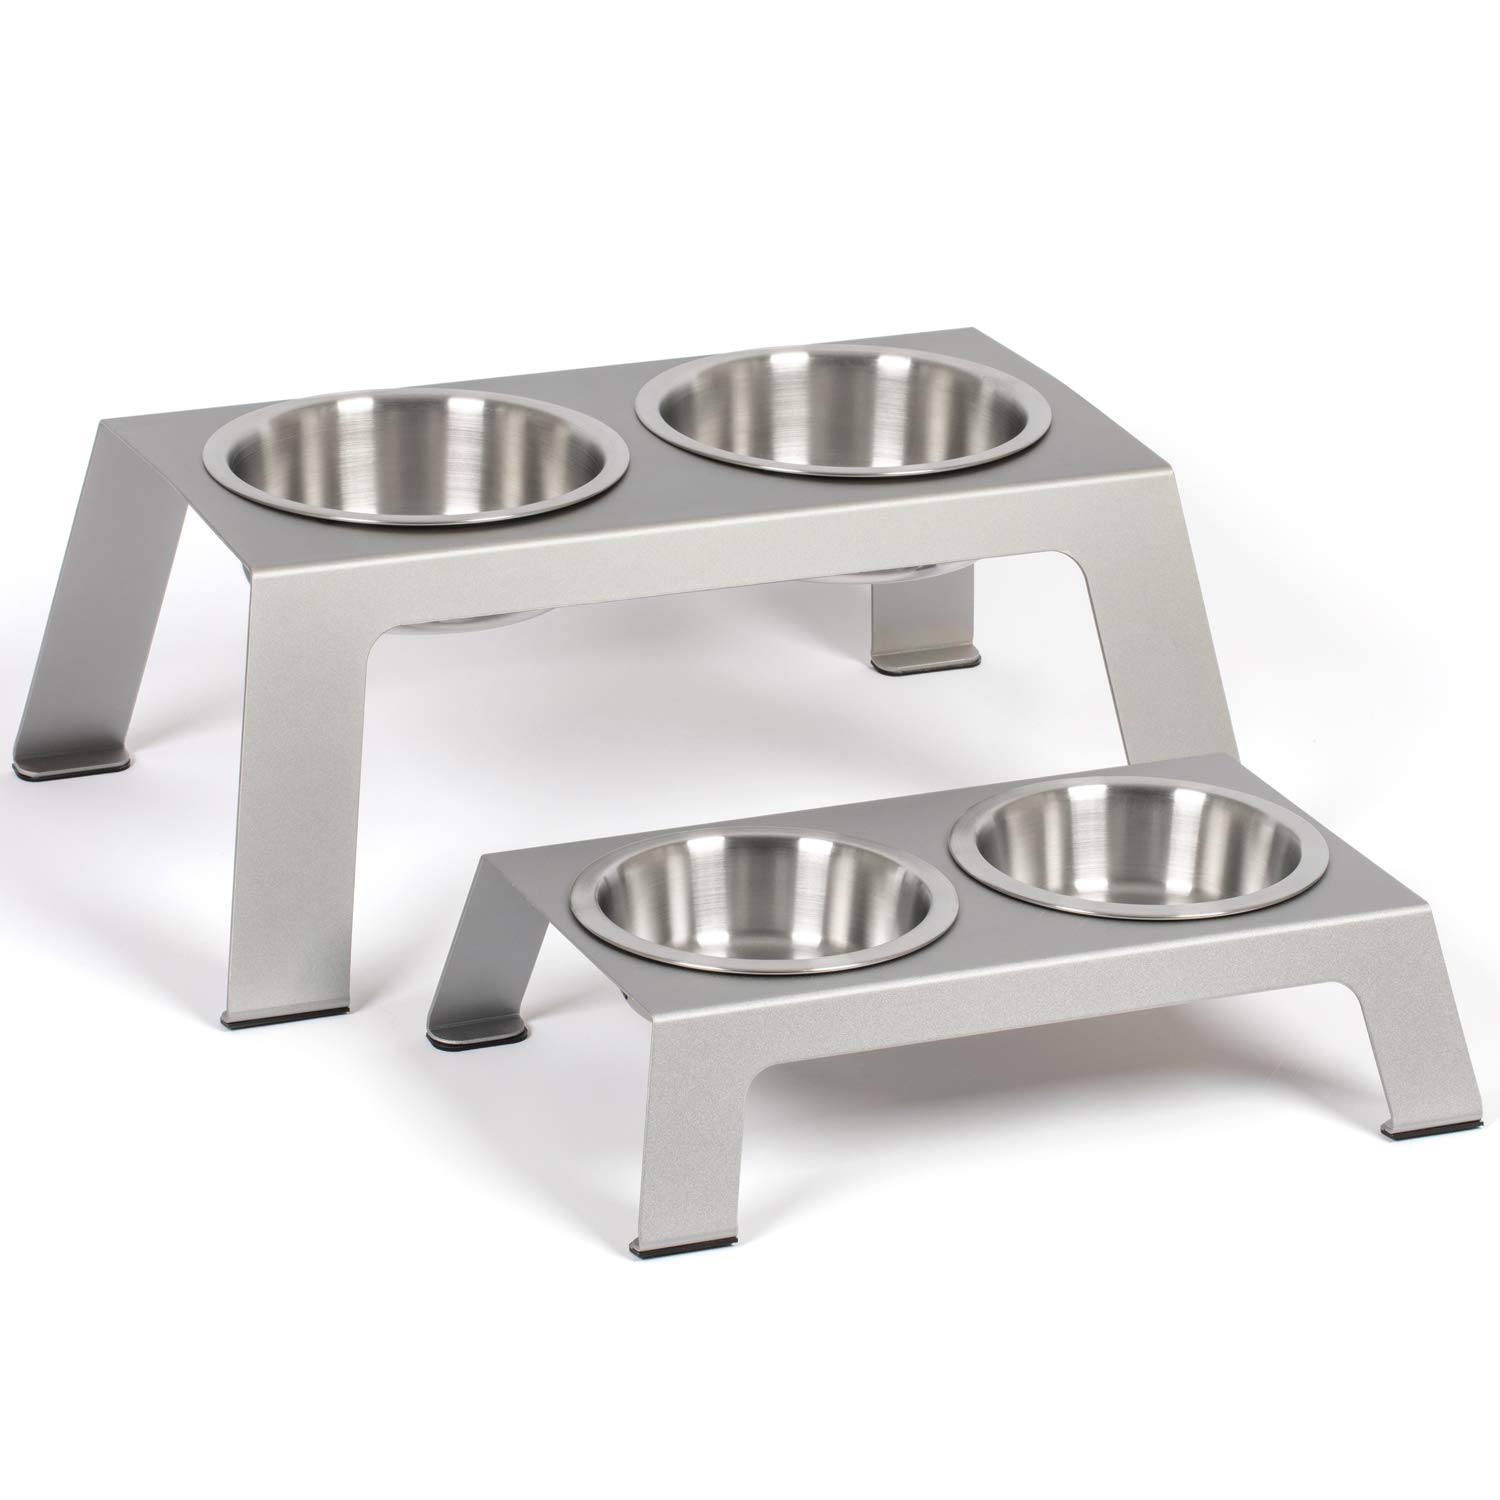 slow feeder dog bowl stainless steel